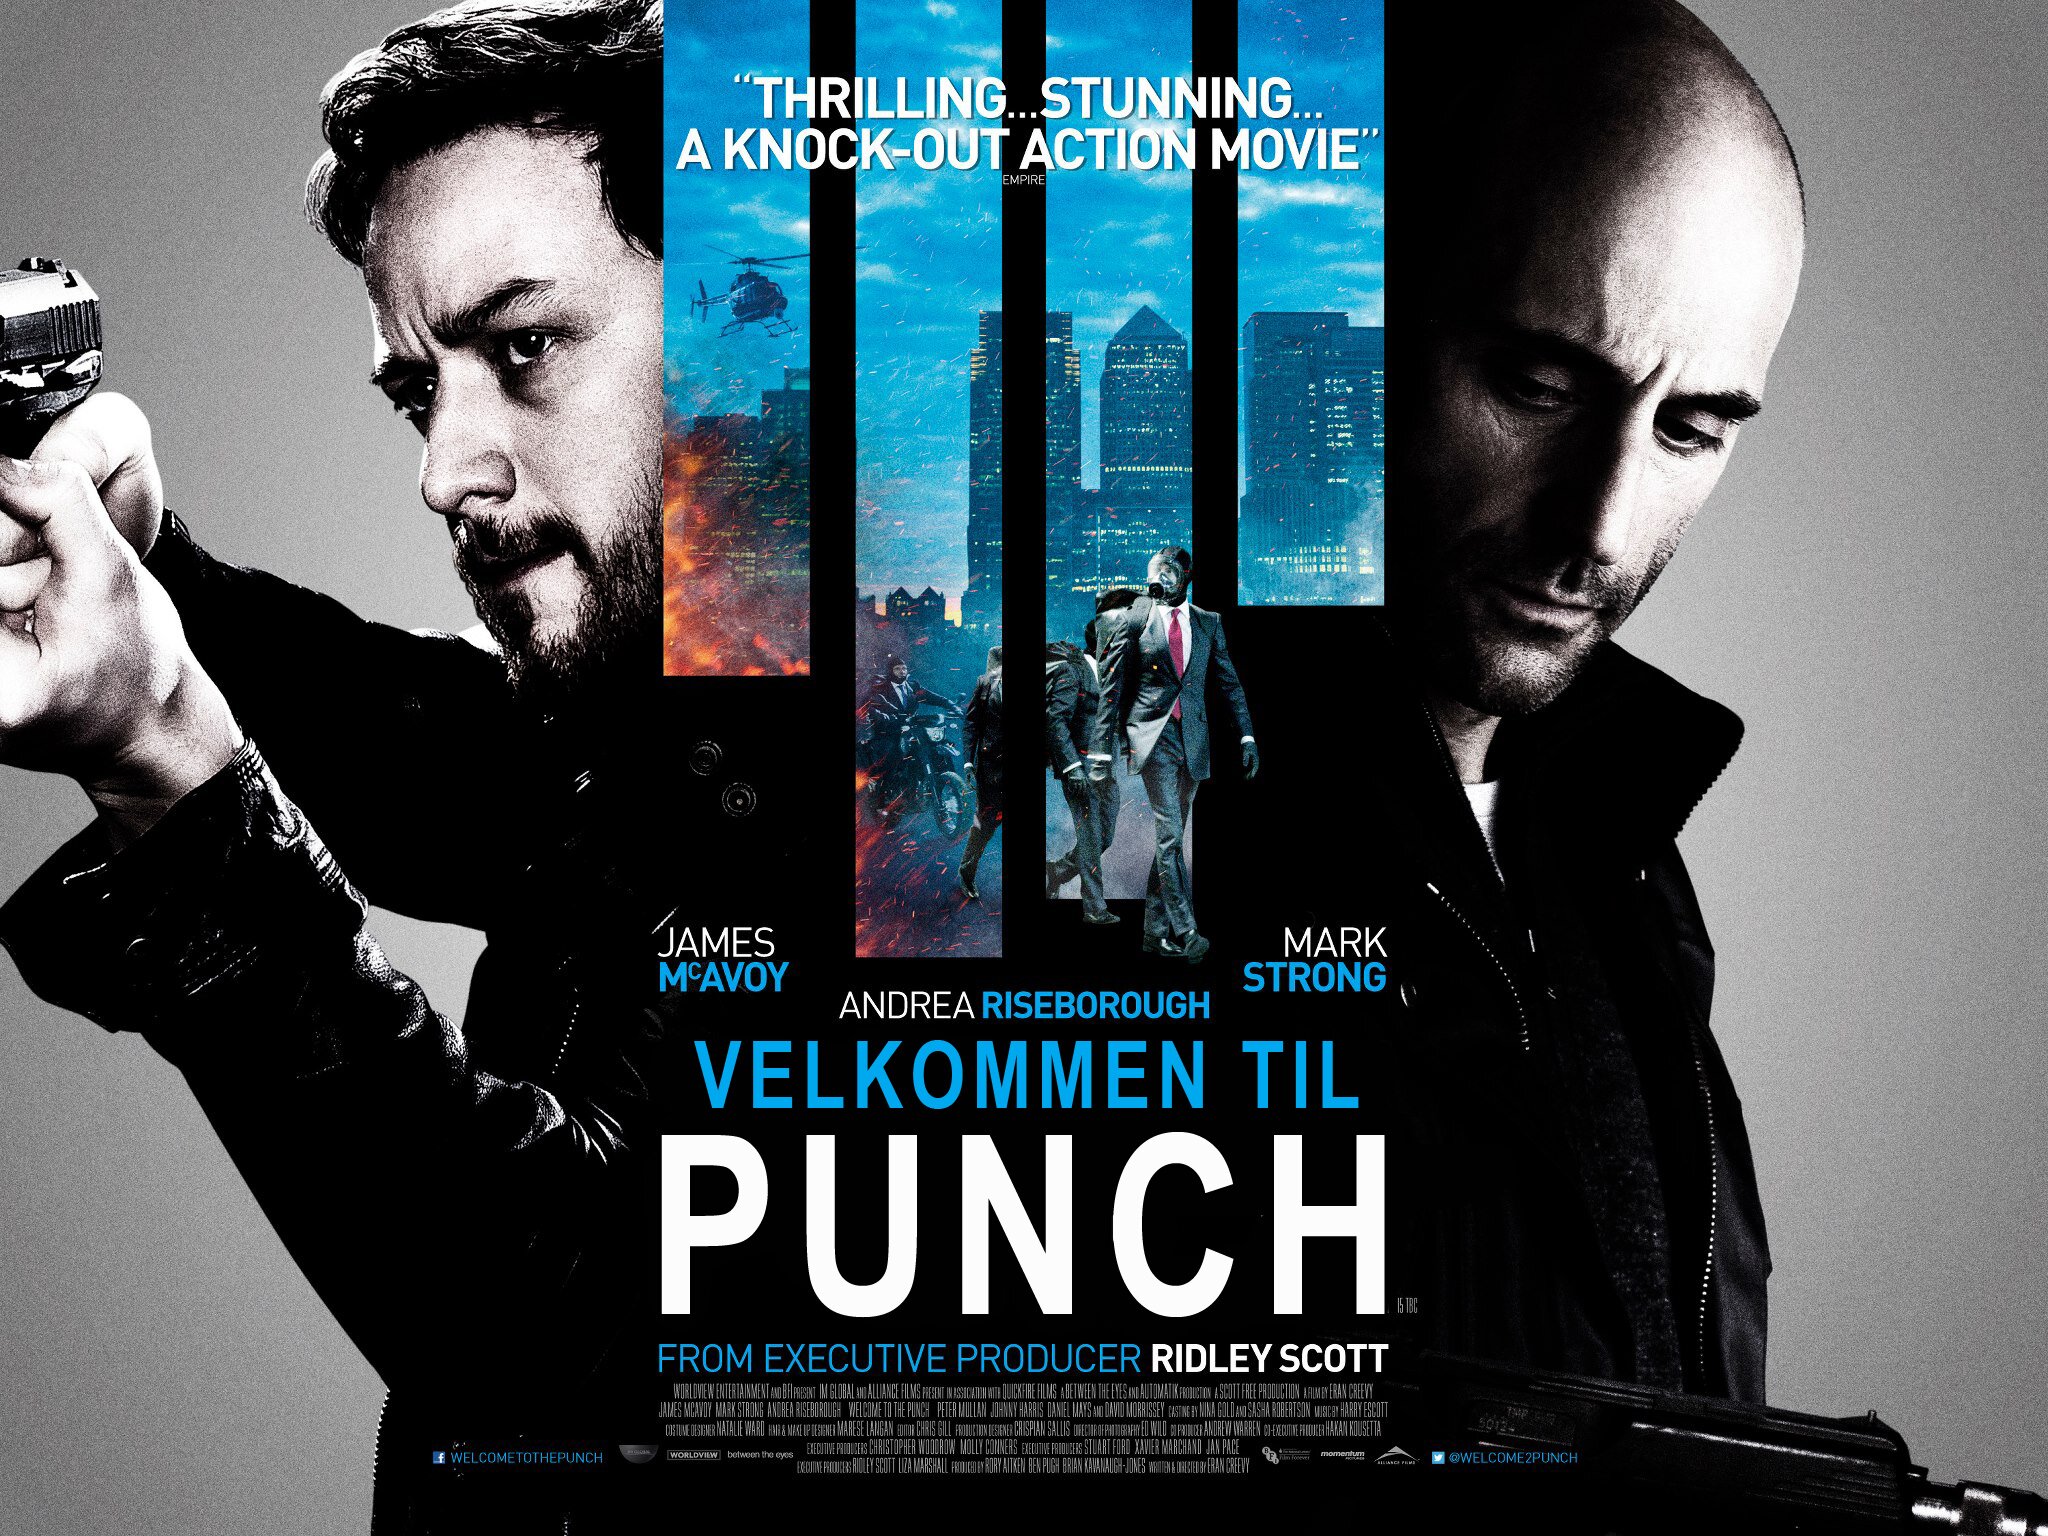 Welcome to the Punch - Denmark poster